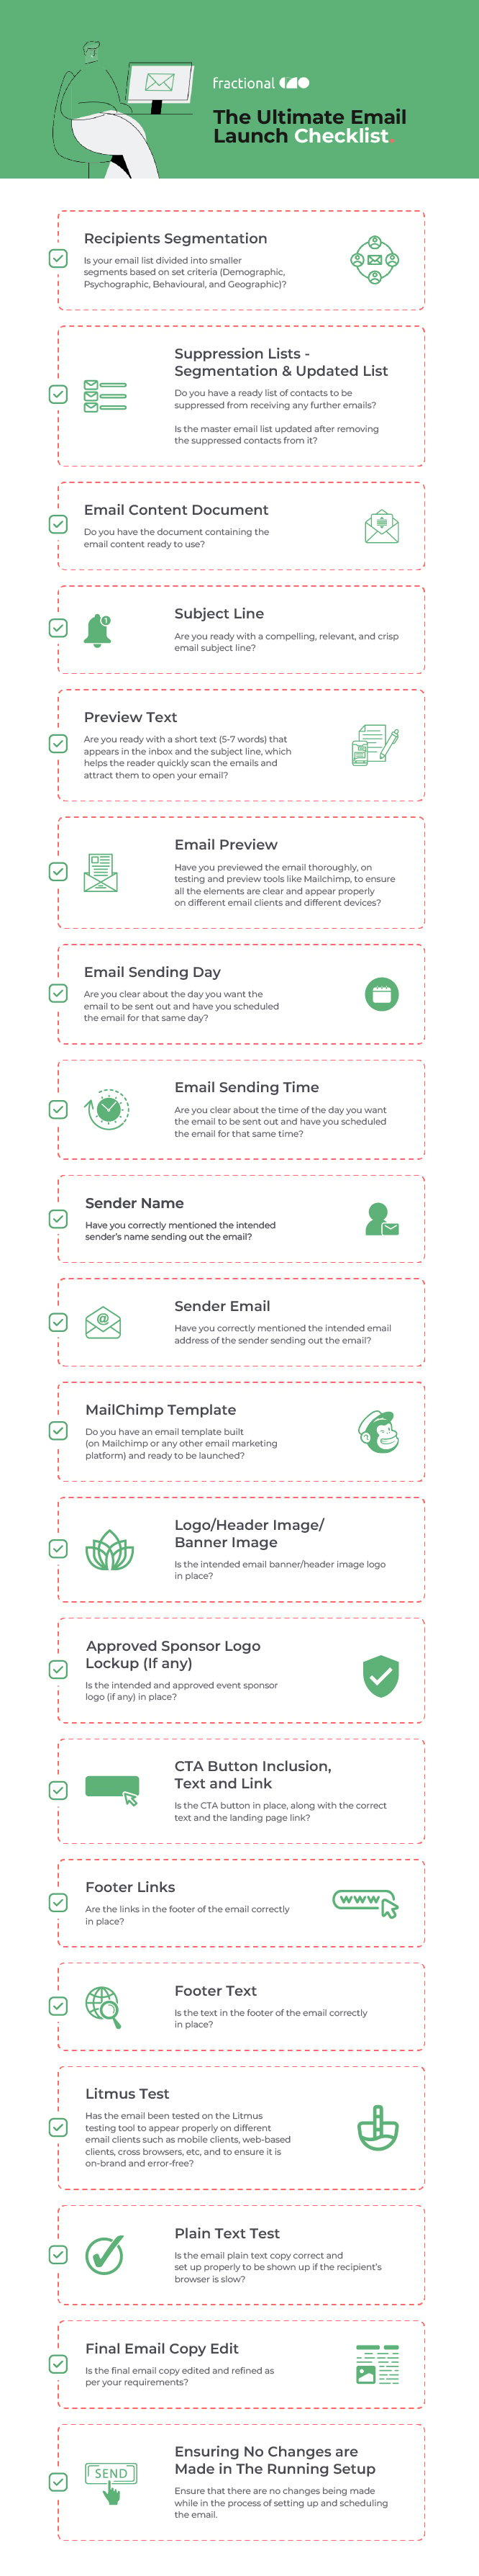 The Ultimate Email Launch Checklist - Infographic Preview